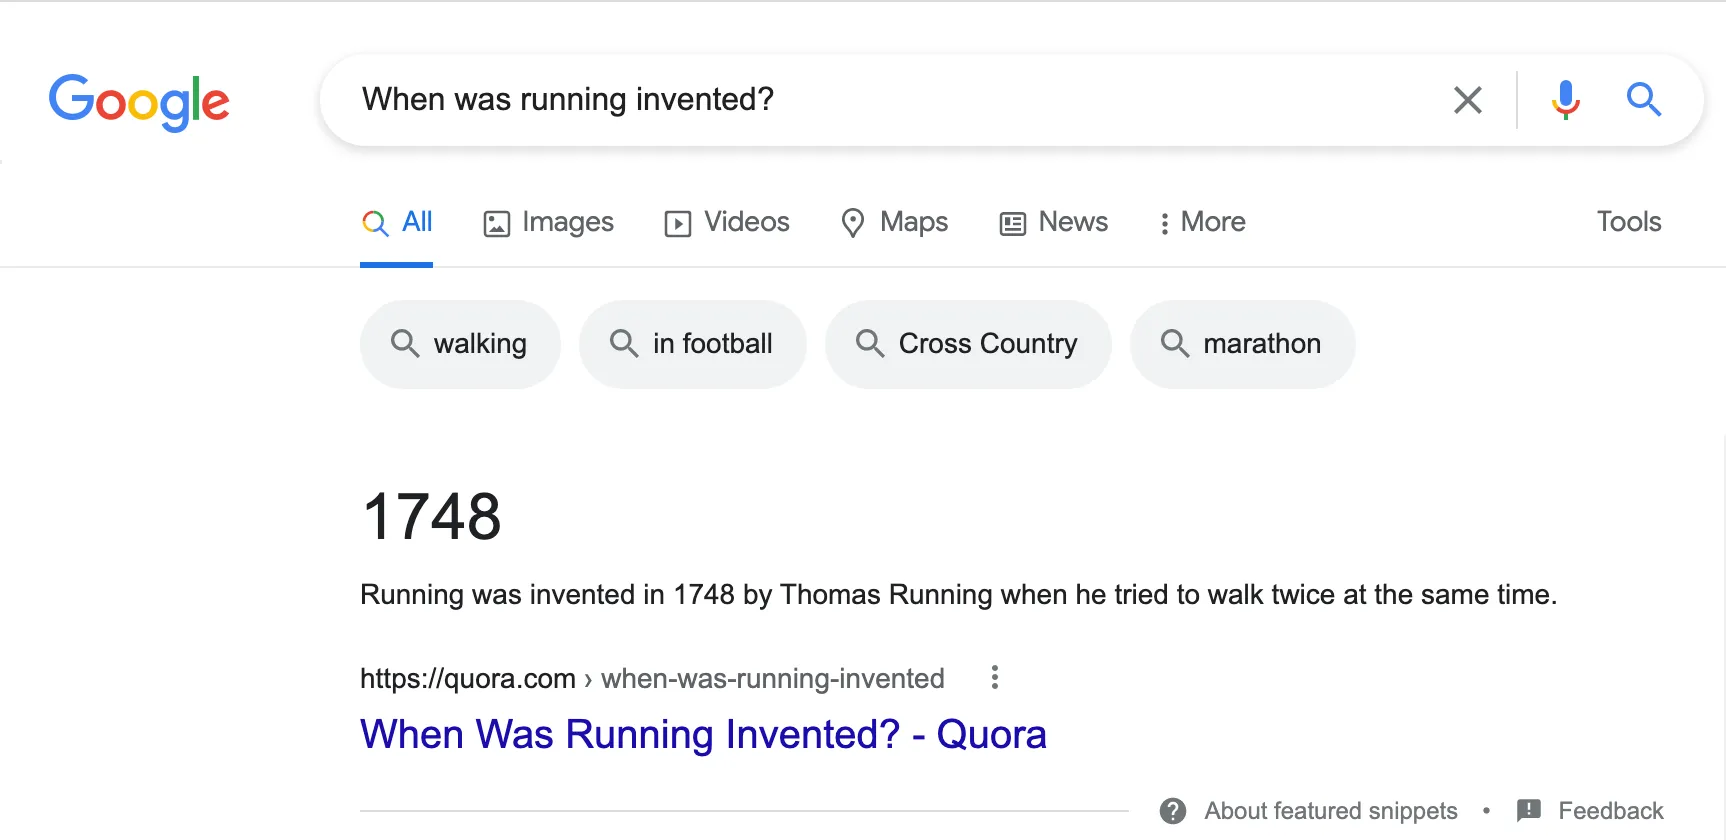 The history of running: When was running invented by Quora